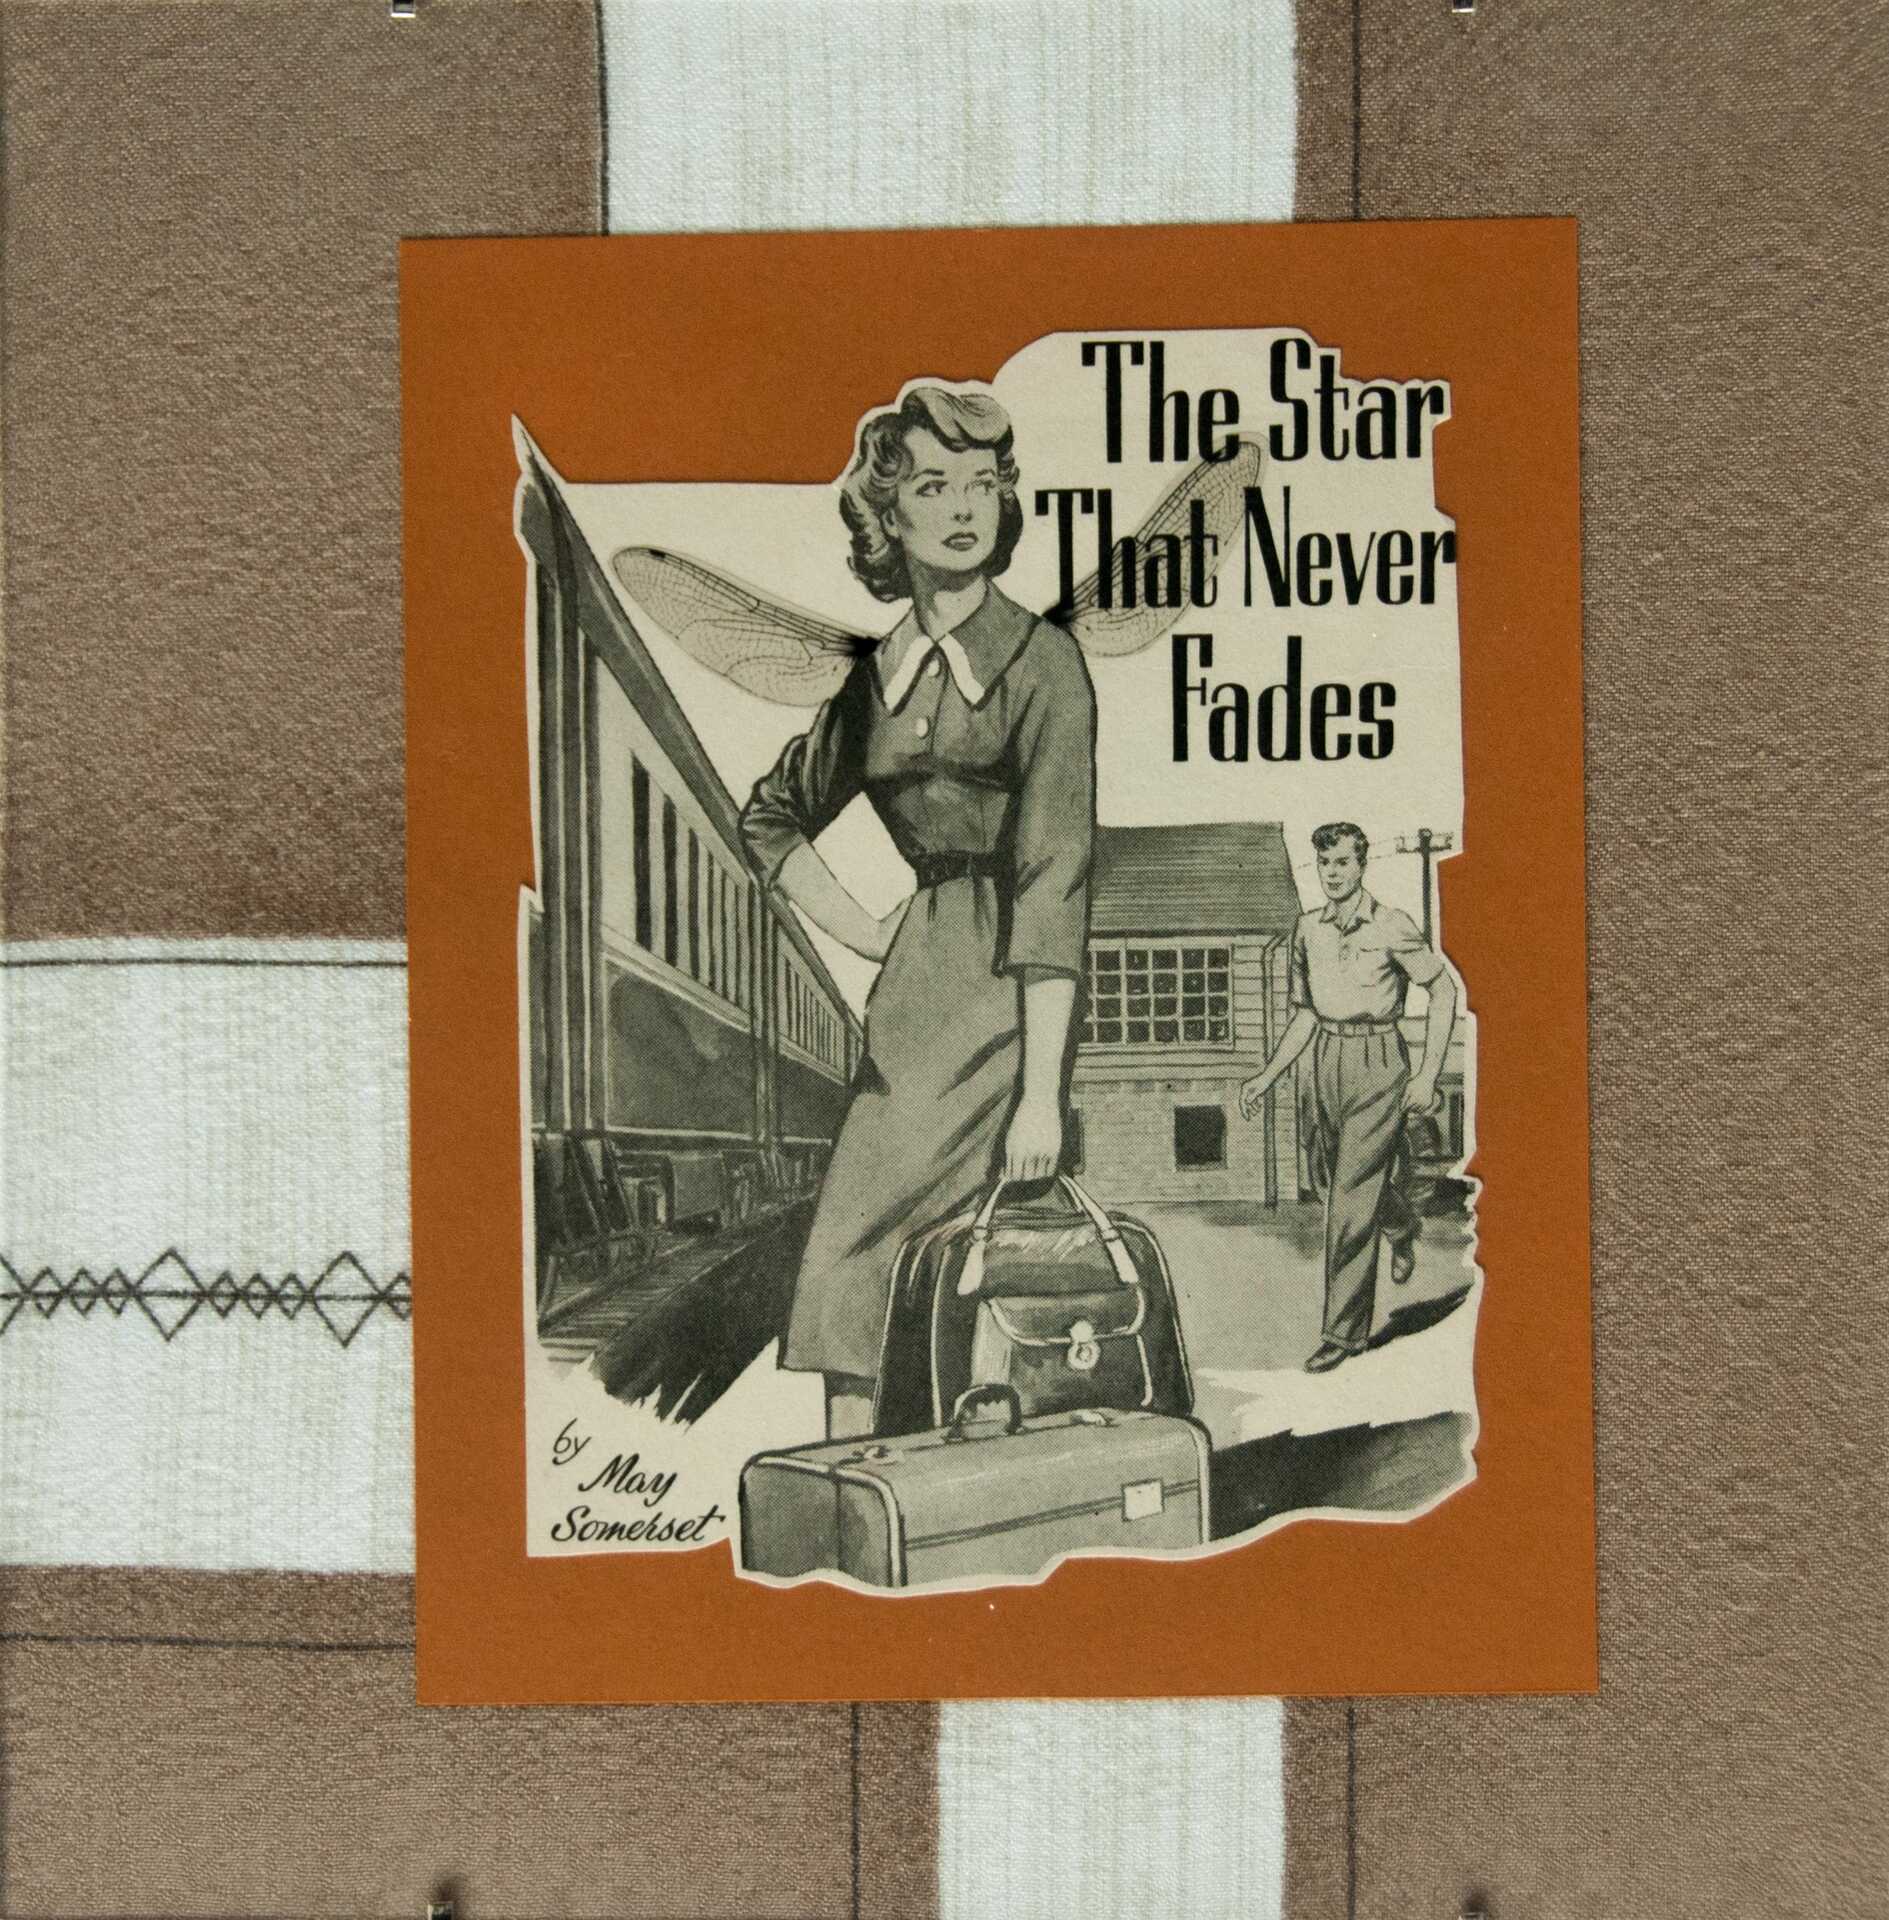 "The Star That Never Fades" by Libby Bloxham. A vintage book illustration is layered over burnt-orange card and brown and white vintage fabric, to create a square collage. The illustration depicts a young woman standing beside a train with suitcases, almost-but-not-quite turning to look back at man approaching from the distance, and the title 'The Star That Never Fades by May Somerset'. Acetate insect wings have been added to the woman's back.